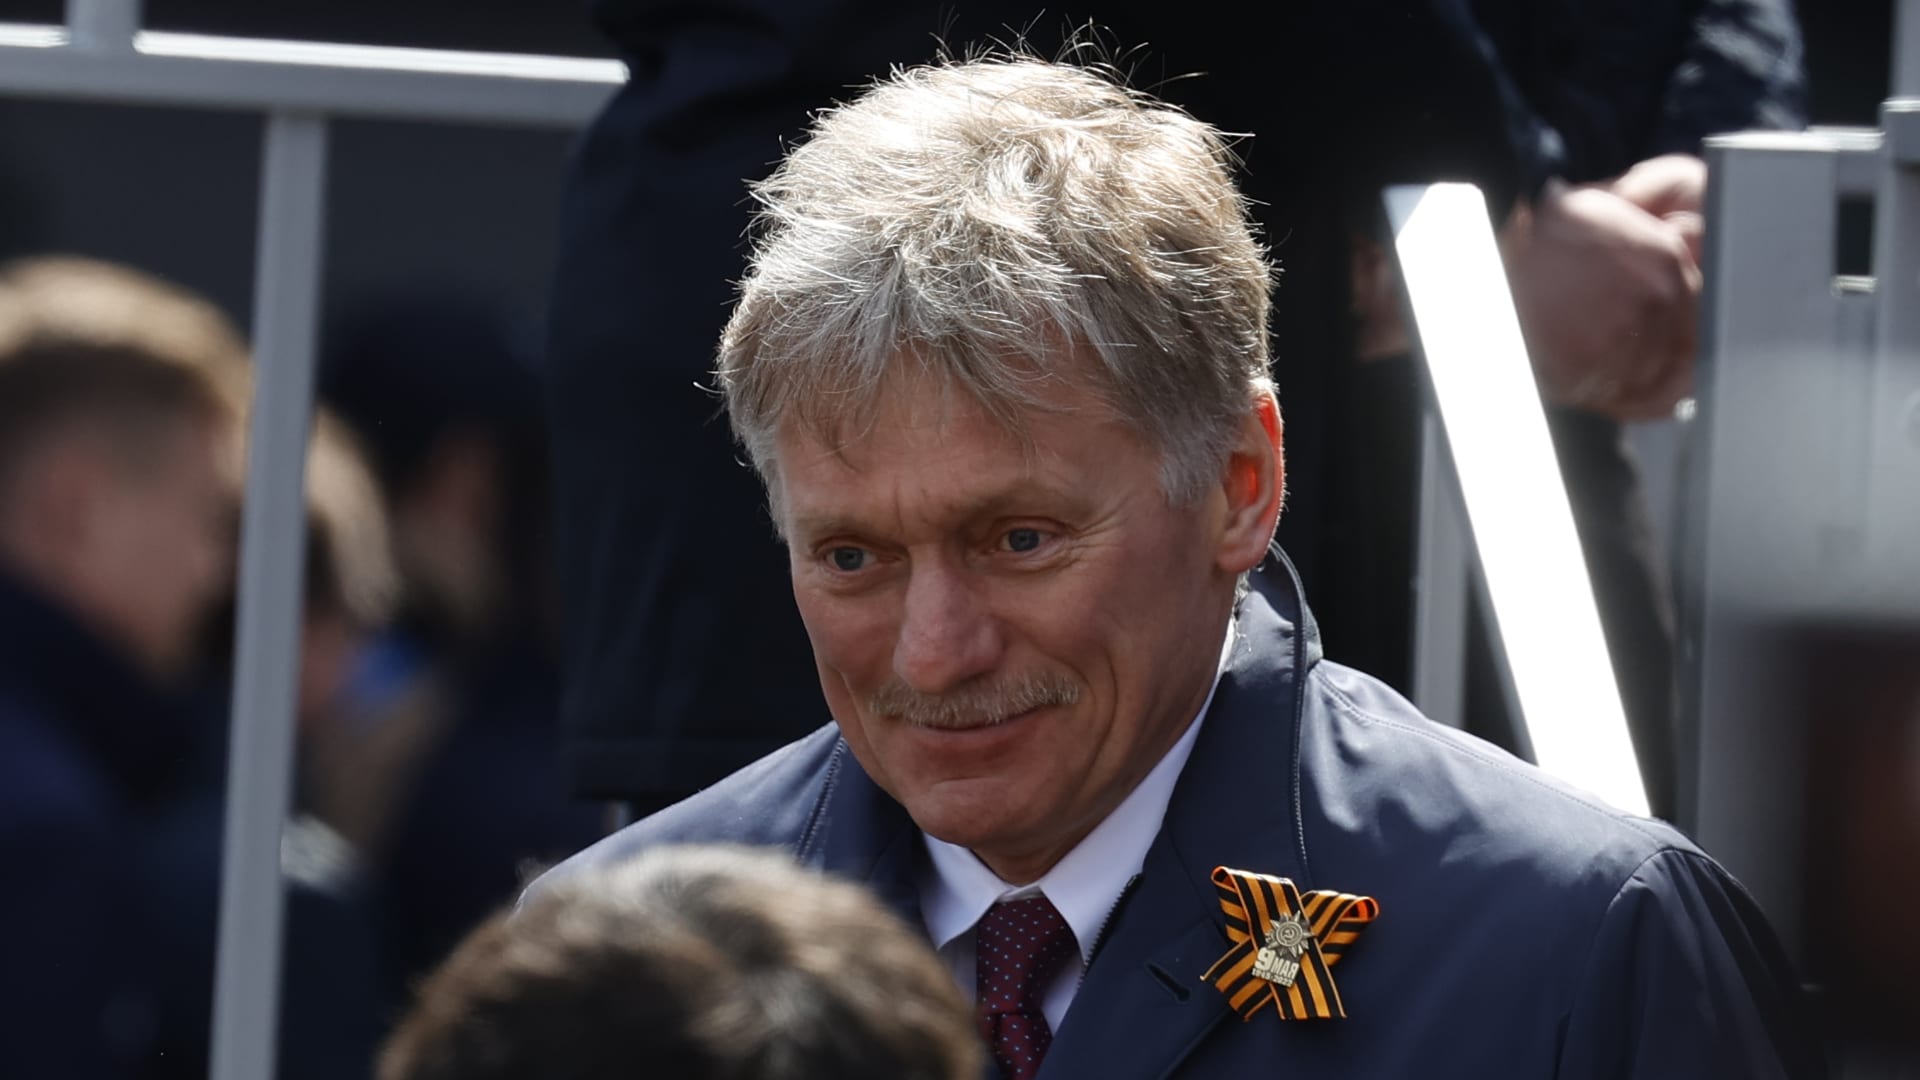 Kremlin's spokesman Dmitriy Peskov attends an event during Russia's Victory Day commemorations in Moscow on May 9, 2022.